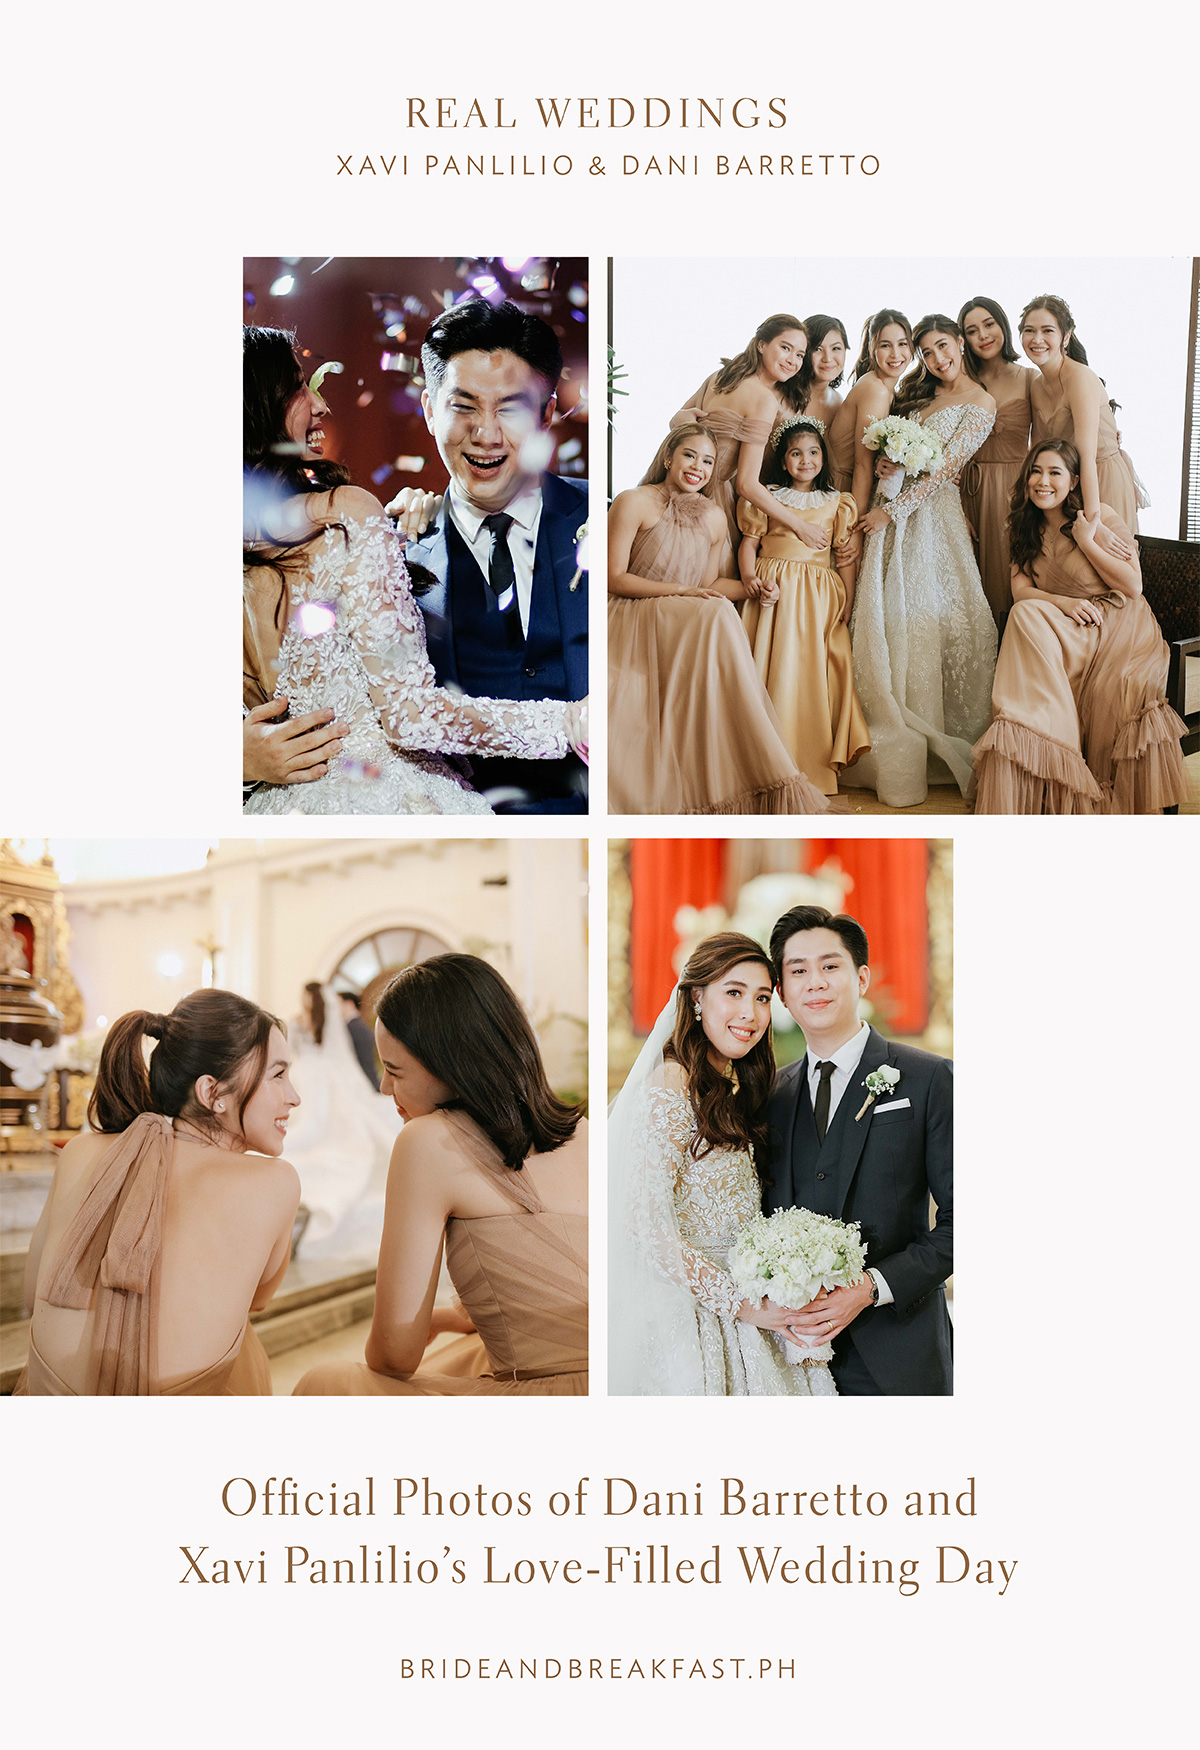 Official Photos of Dani Baretto and Xavi Panlilio’s Love-Filled Wedding Day